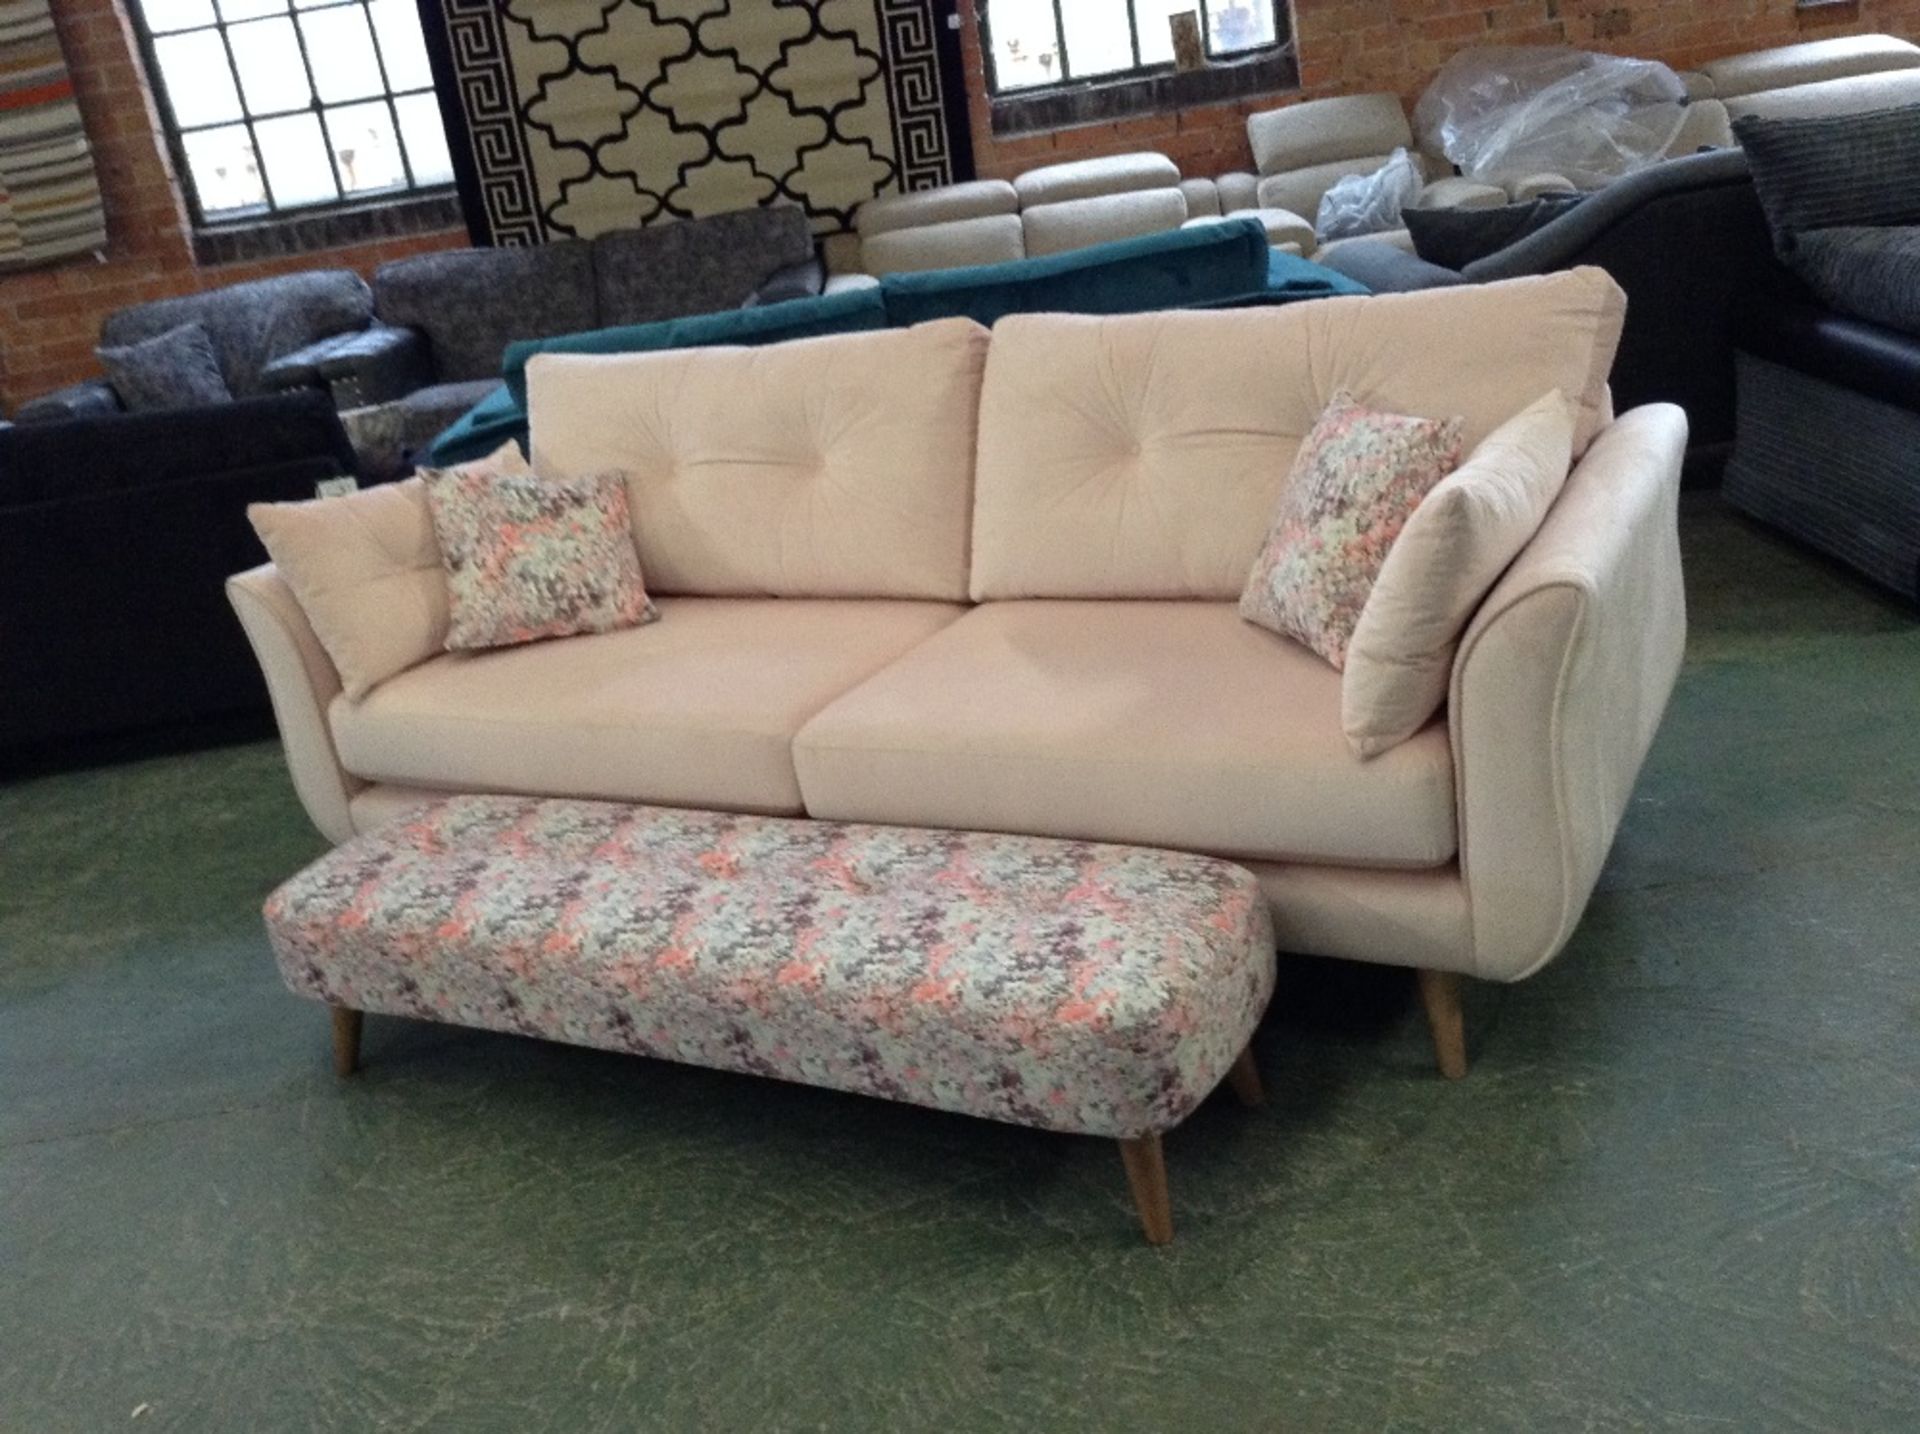 PINK LARGE 3 SEATER SOFA AND MULTI COLOURED PATTER